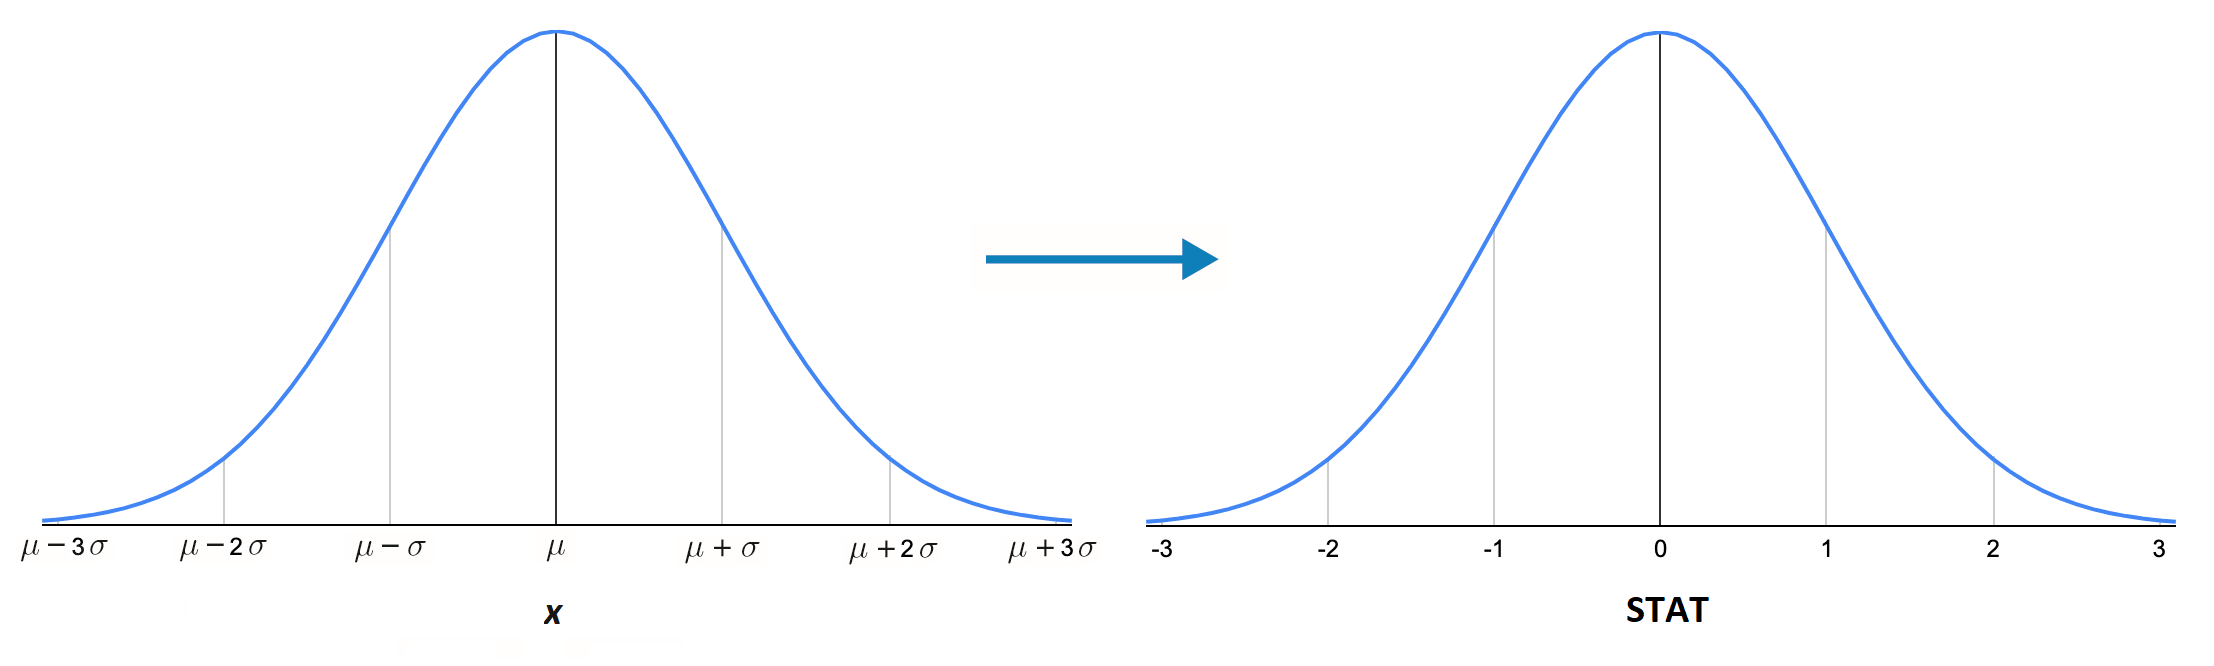 Converting normally distributed data to standard normal.